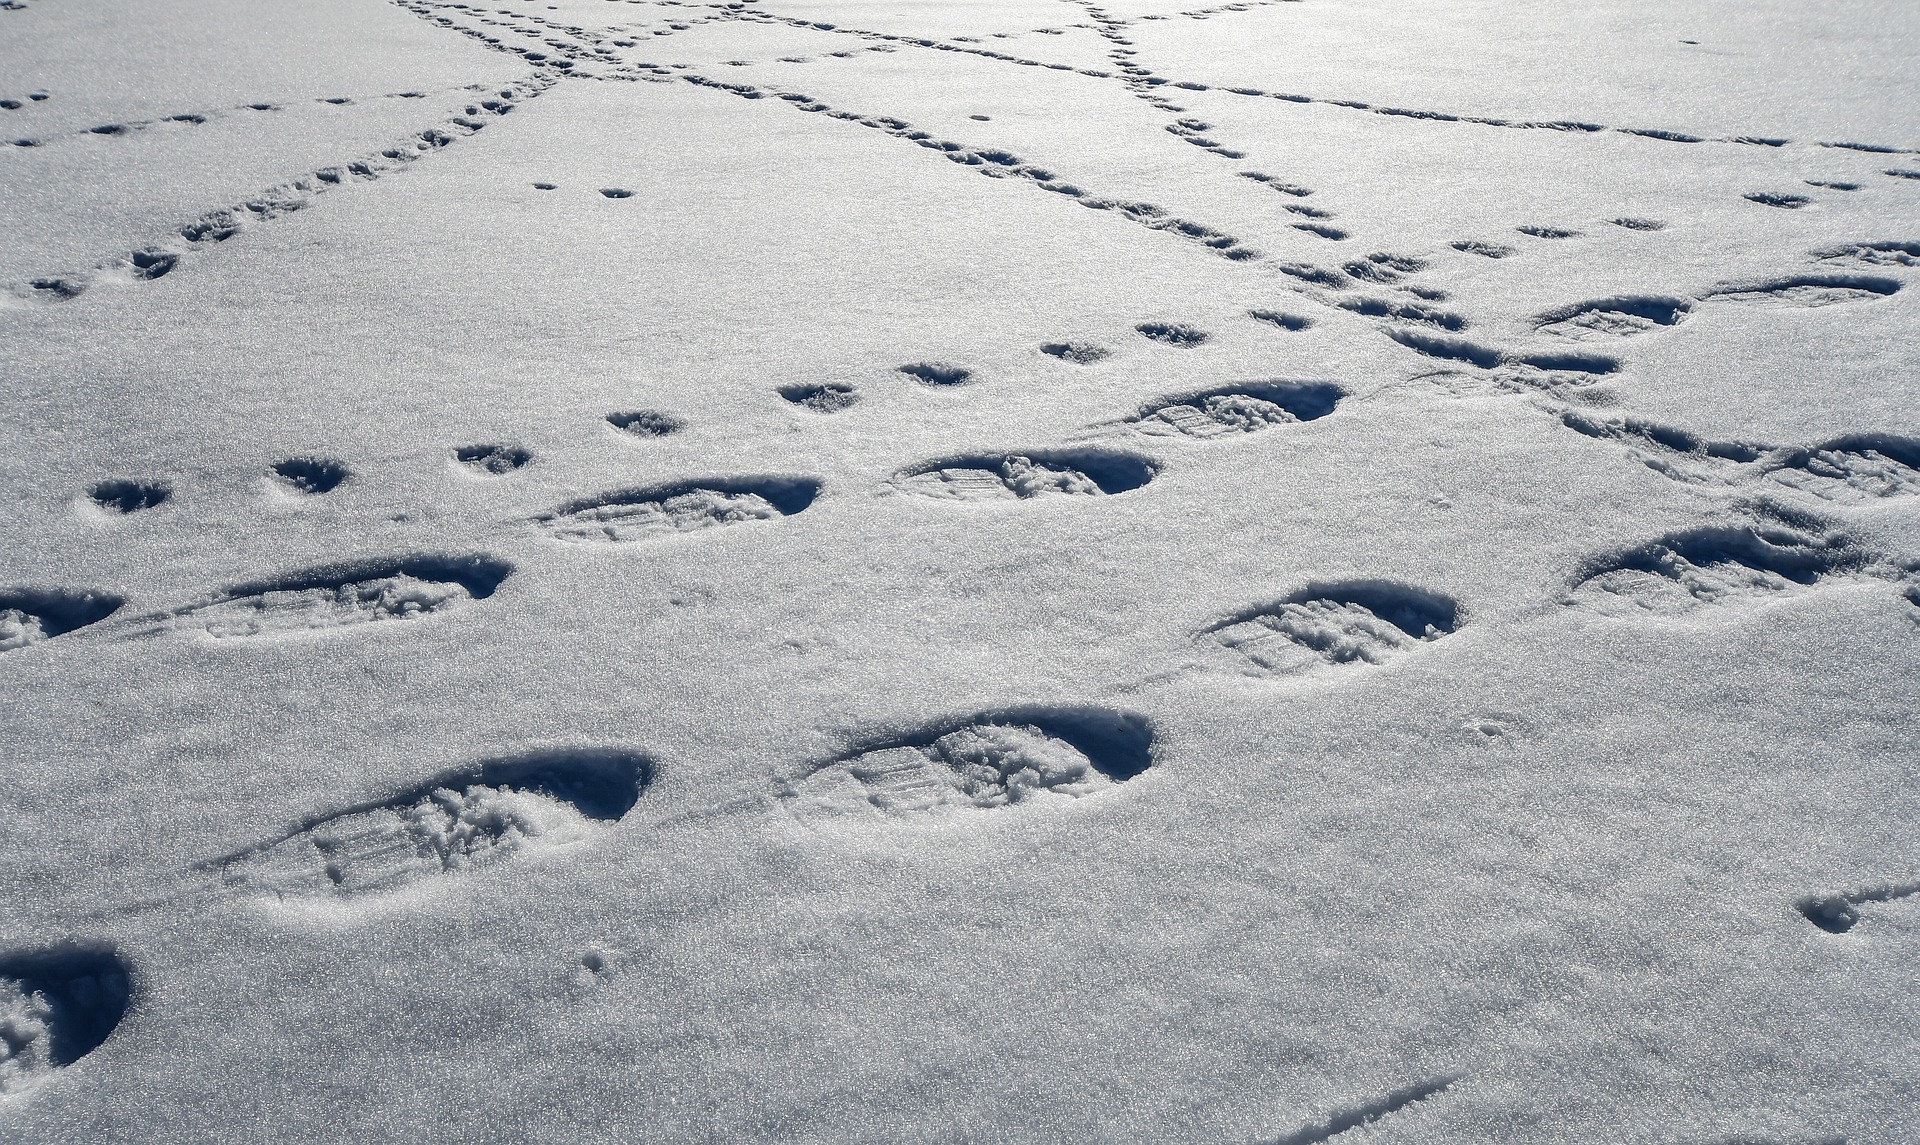 Snowshoeing tracks in snow.